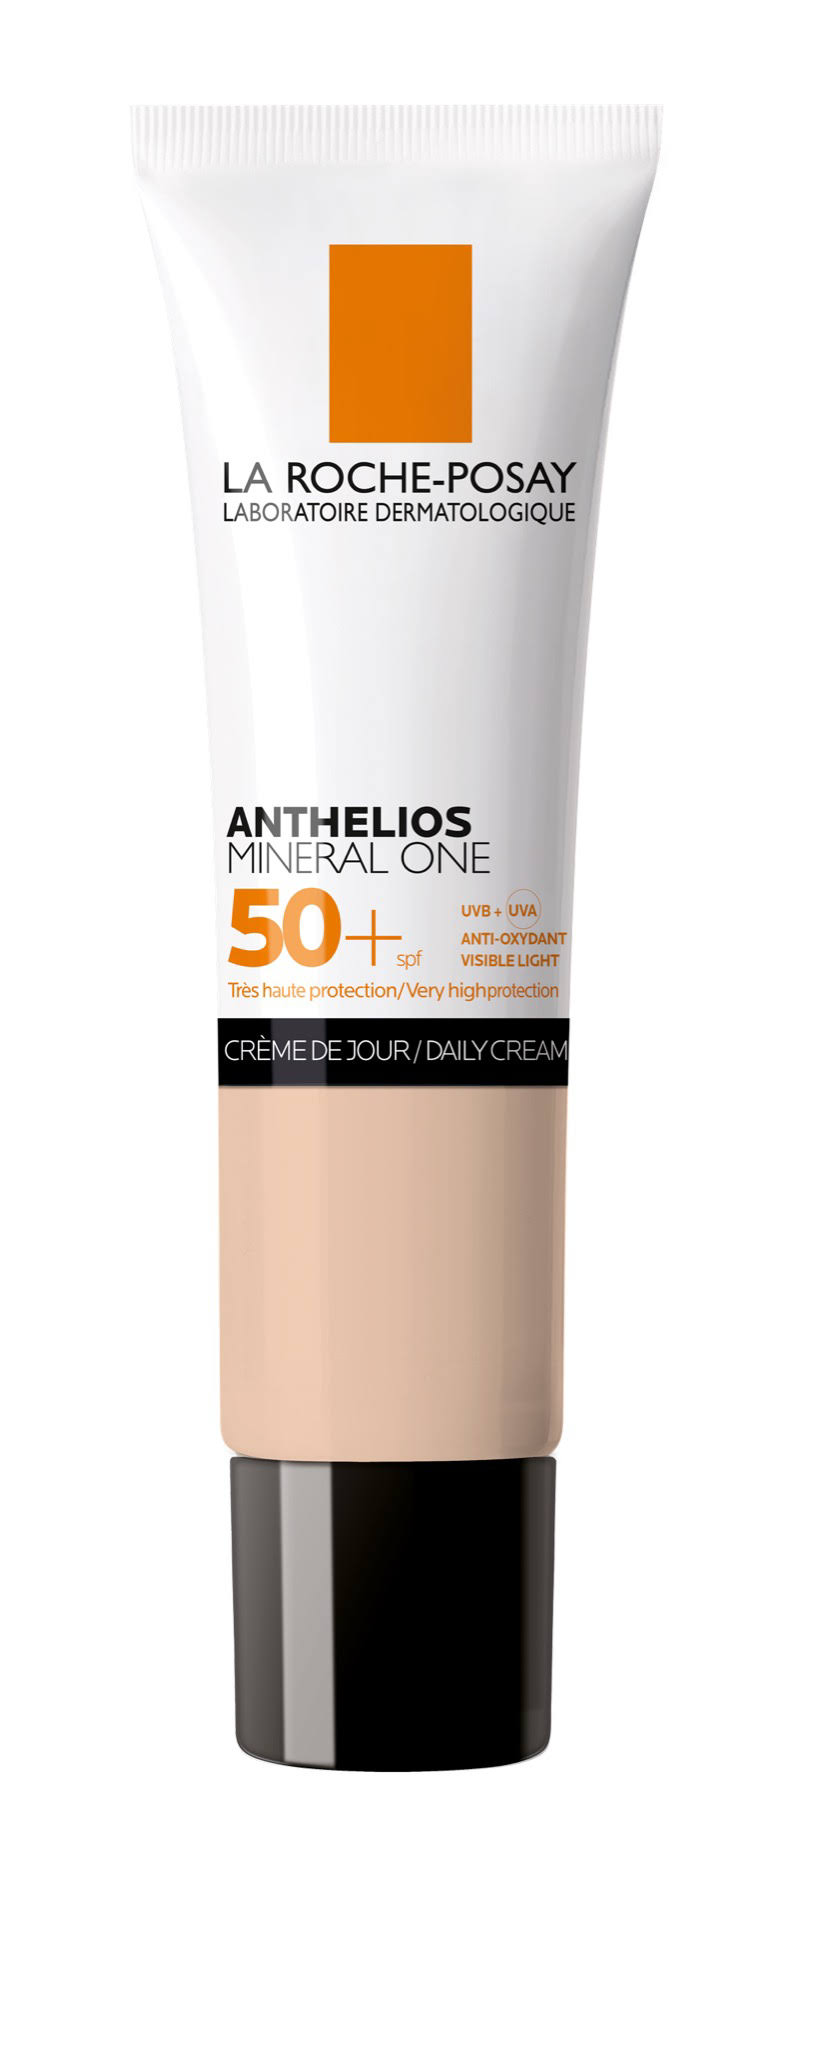 La Roche Posay Anthelios Mineral One Spf50+ Light 30ml